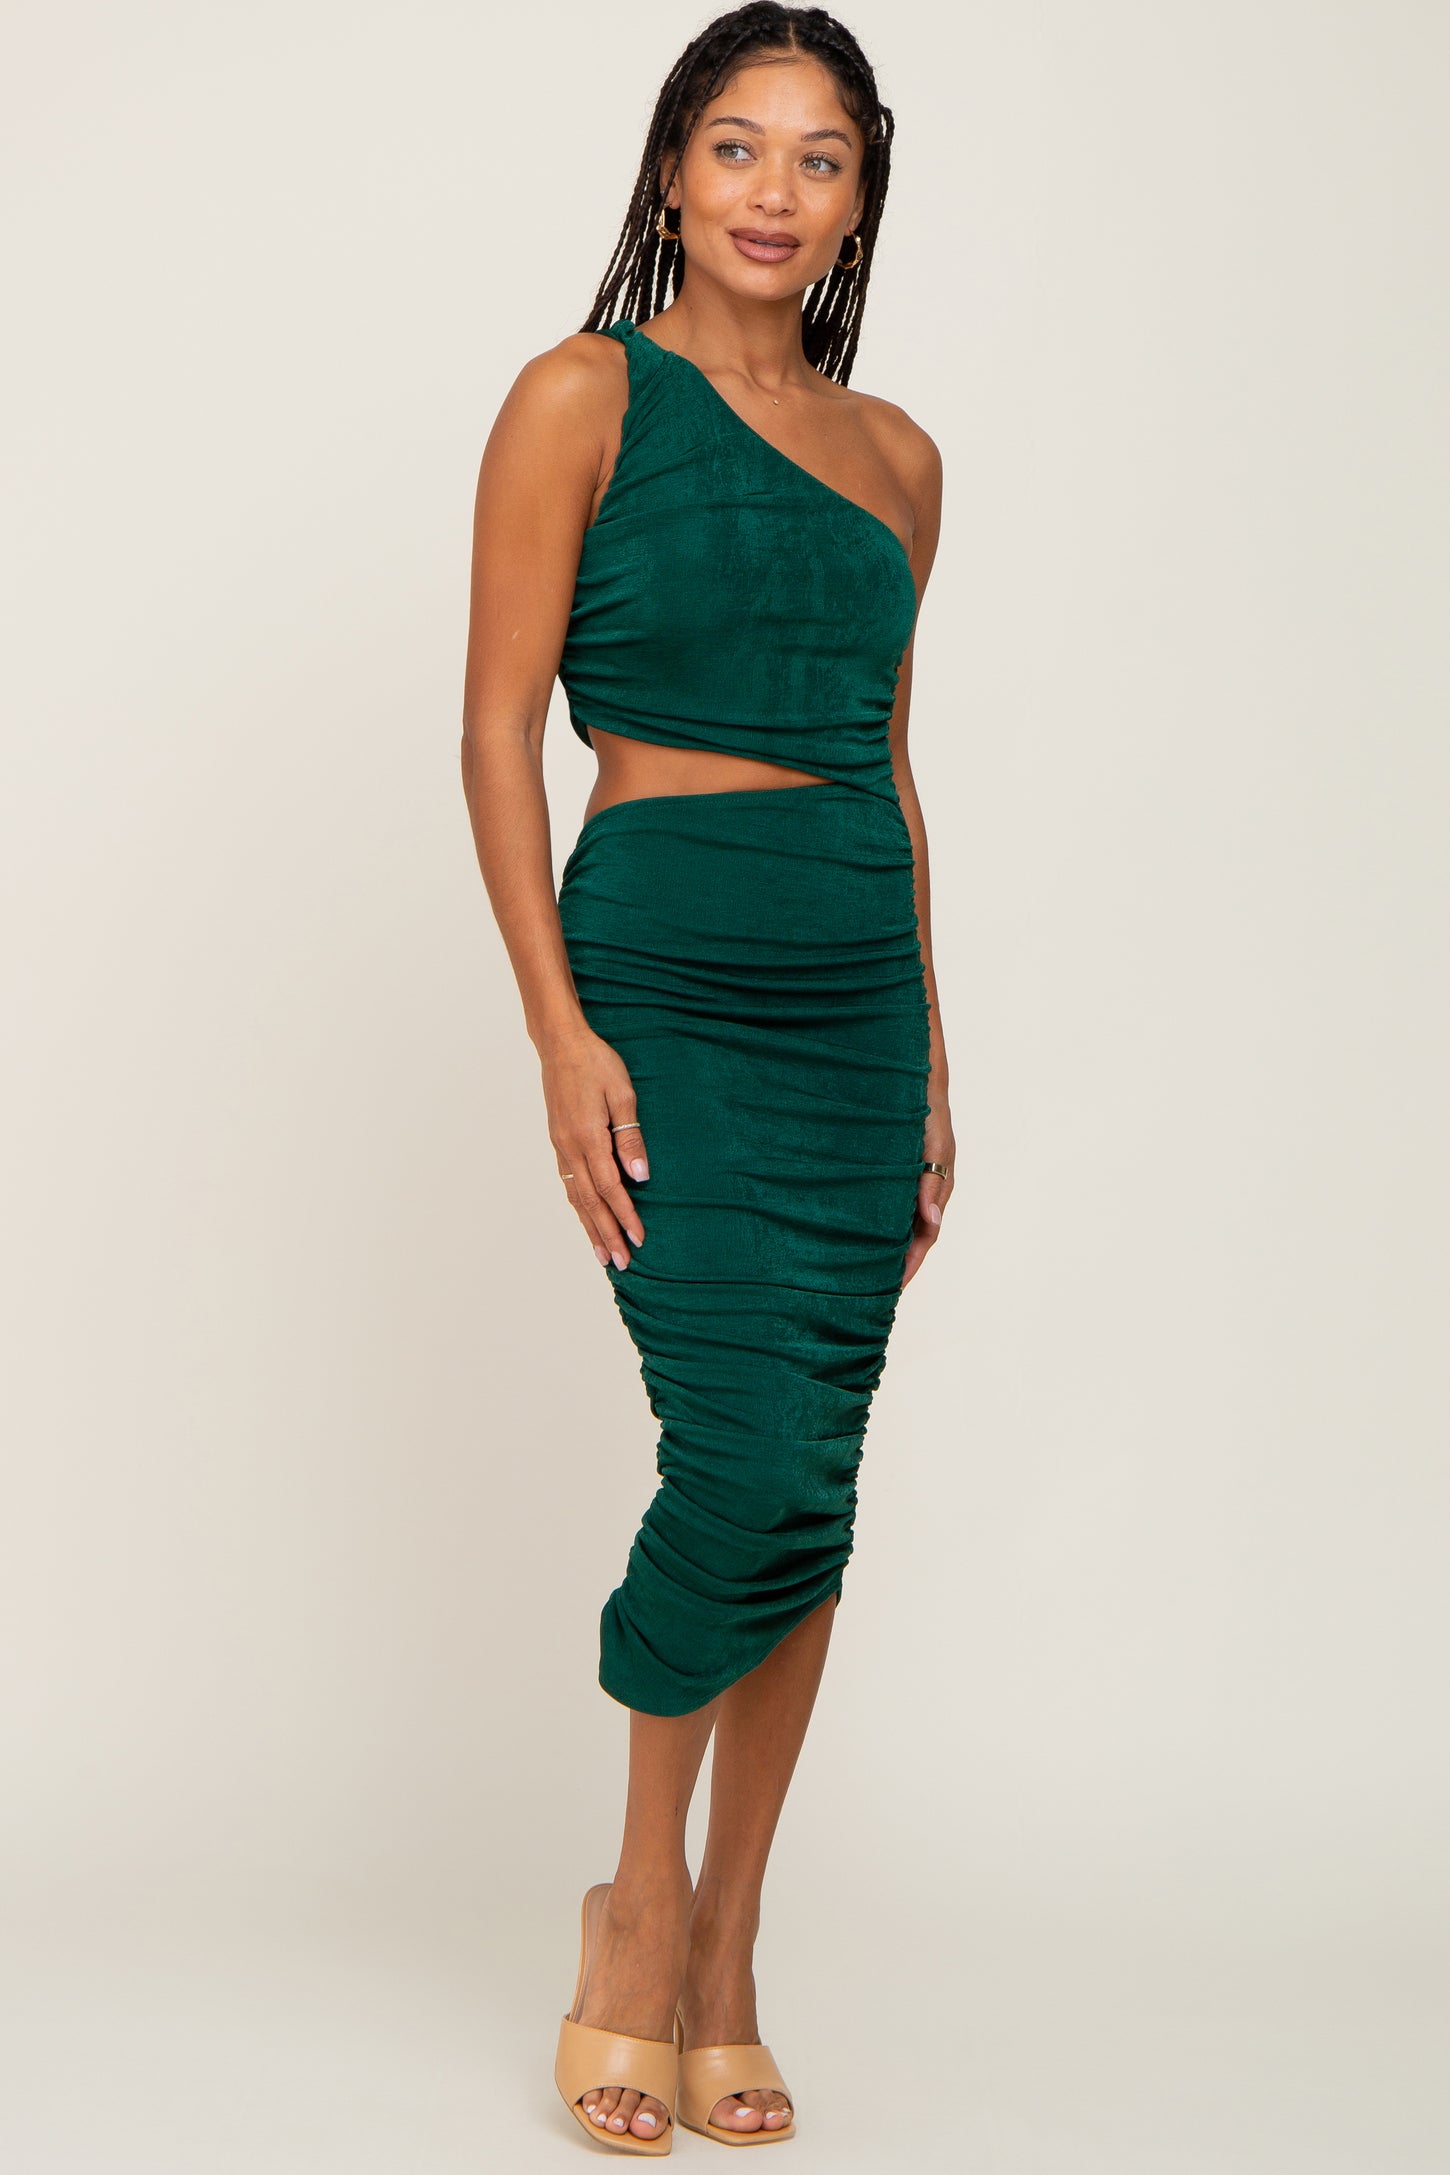 Forest Green Ruched Cutout One Shoulder Dress